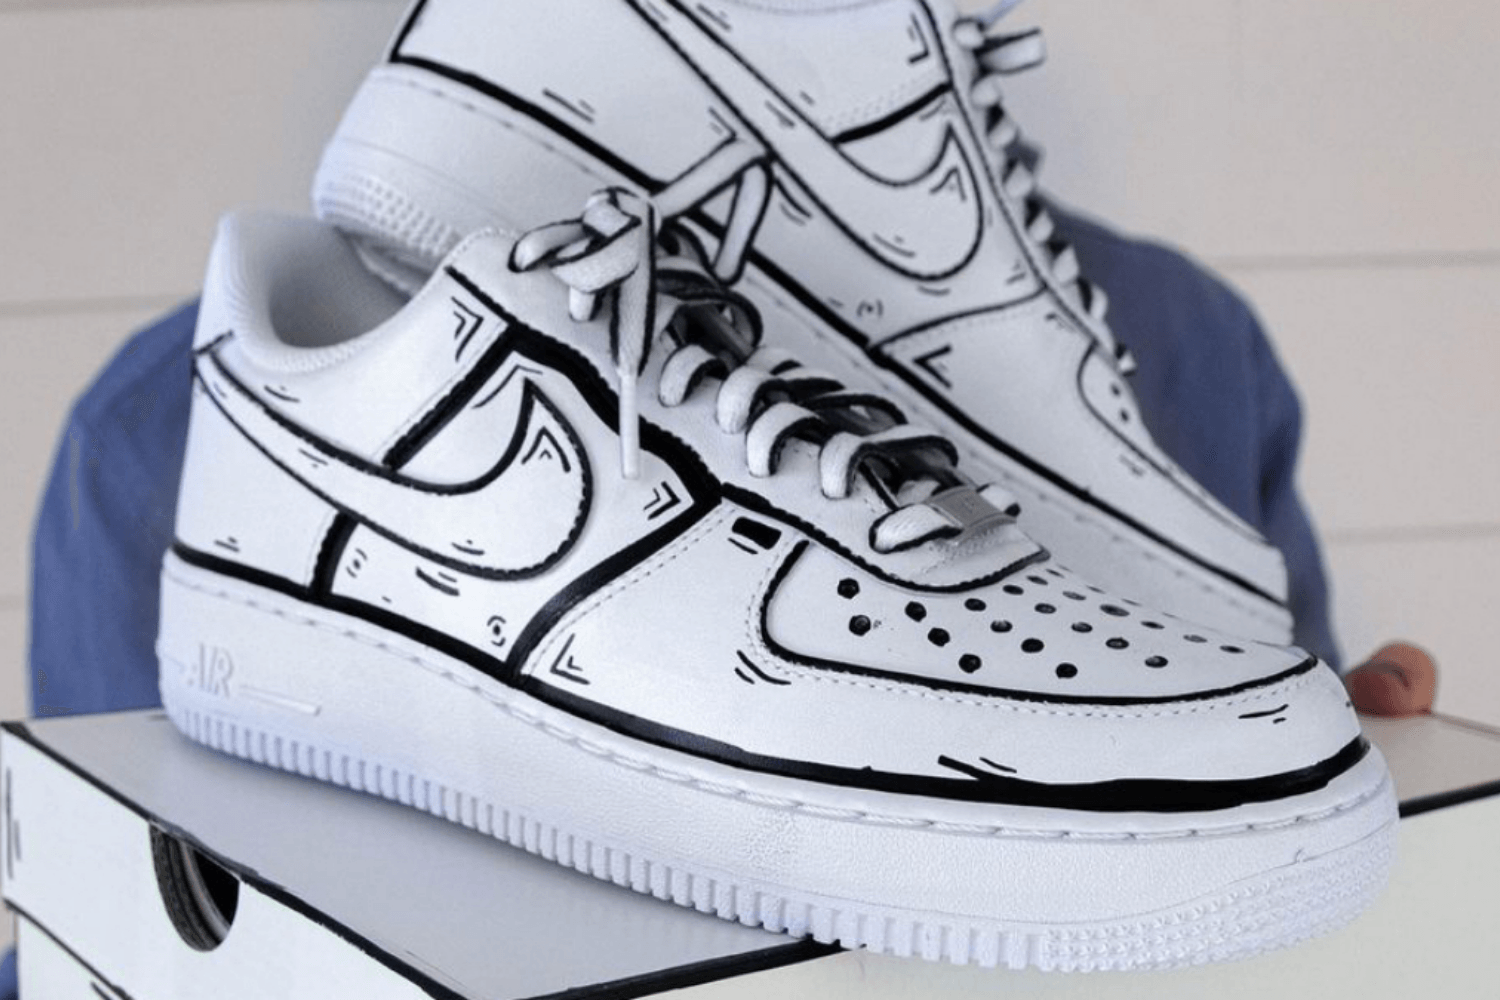 Custom Air Force 1 - your designs on the popular silhouette